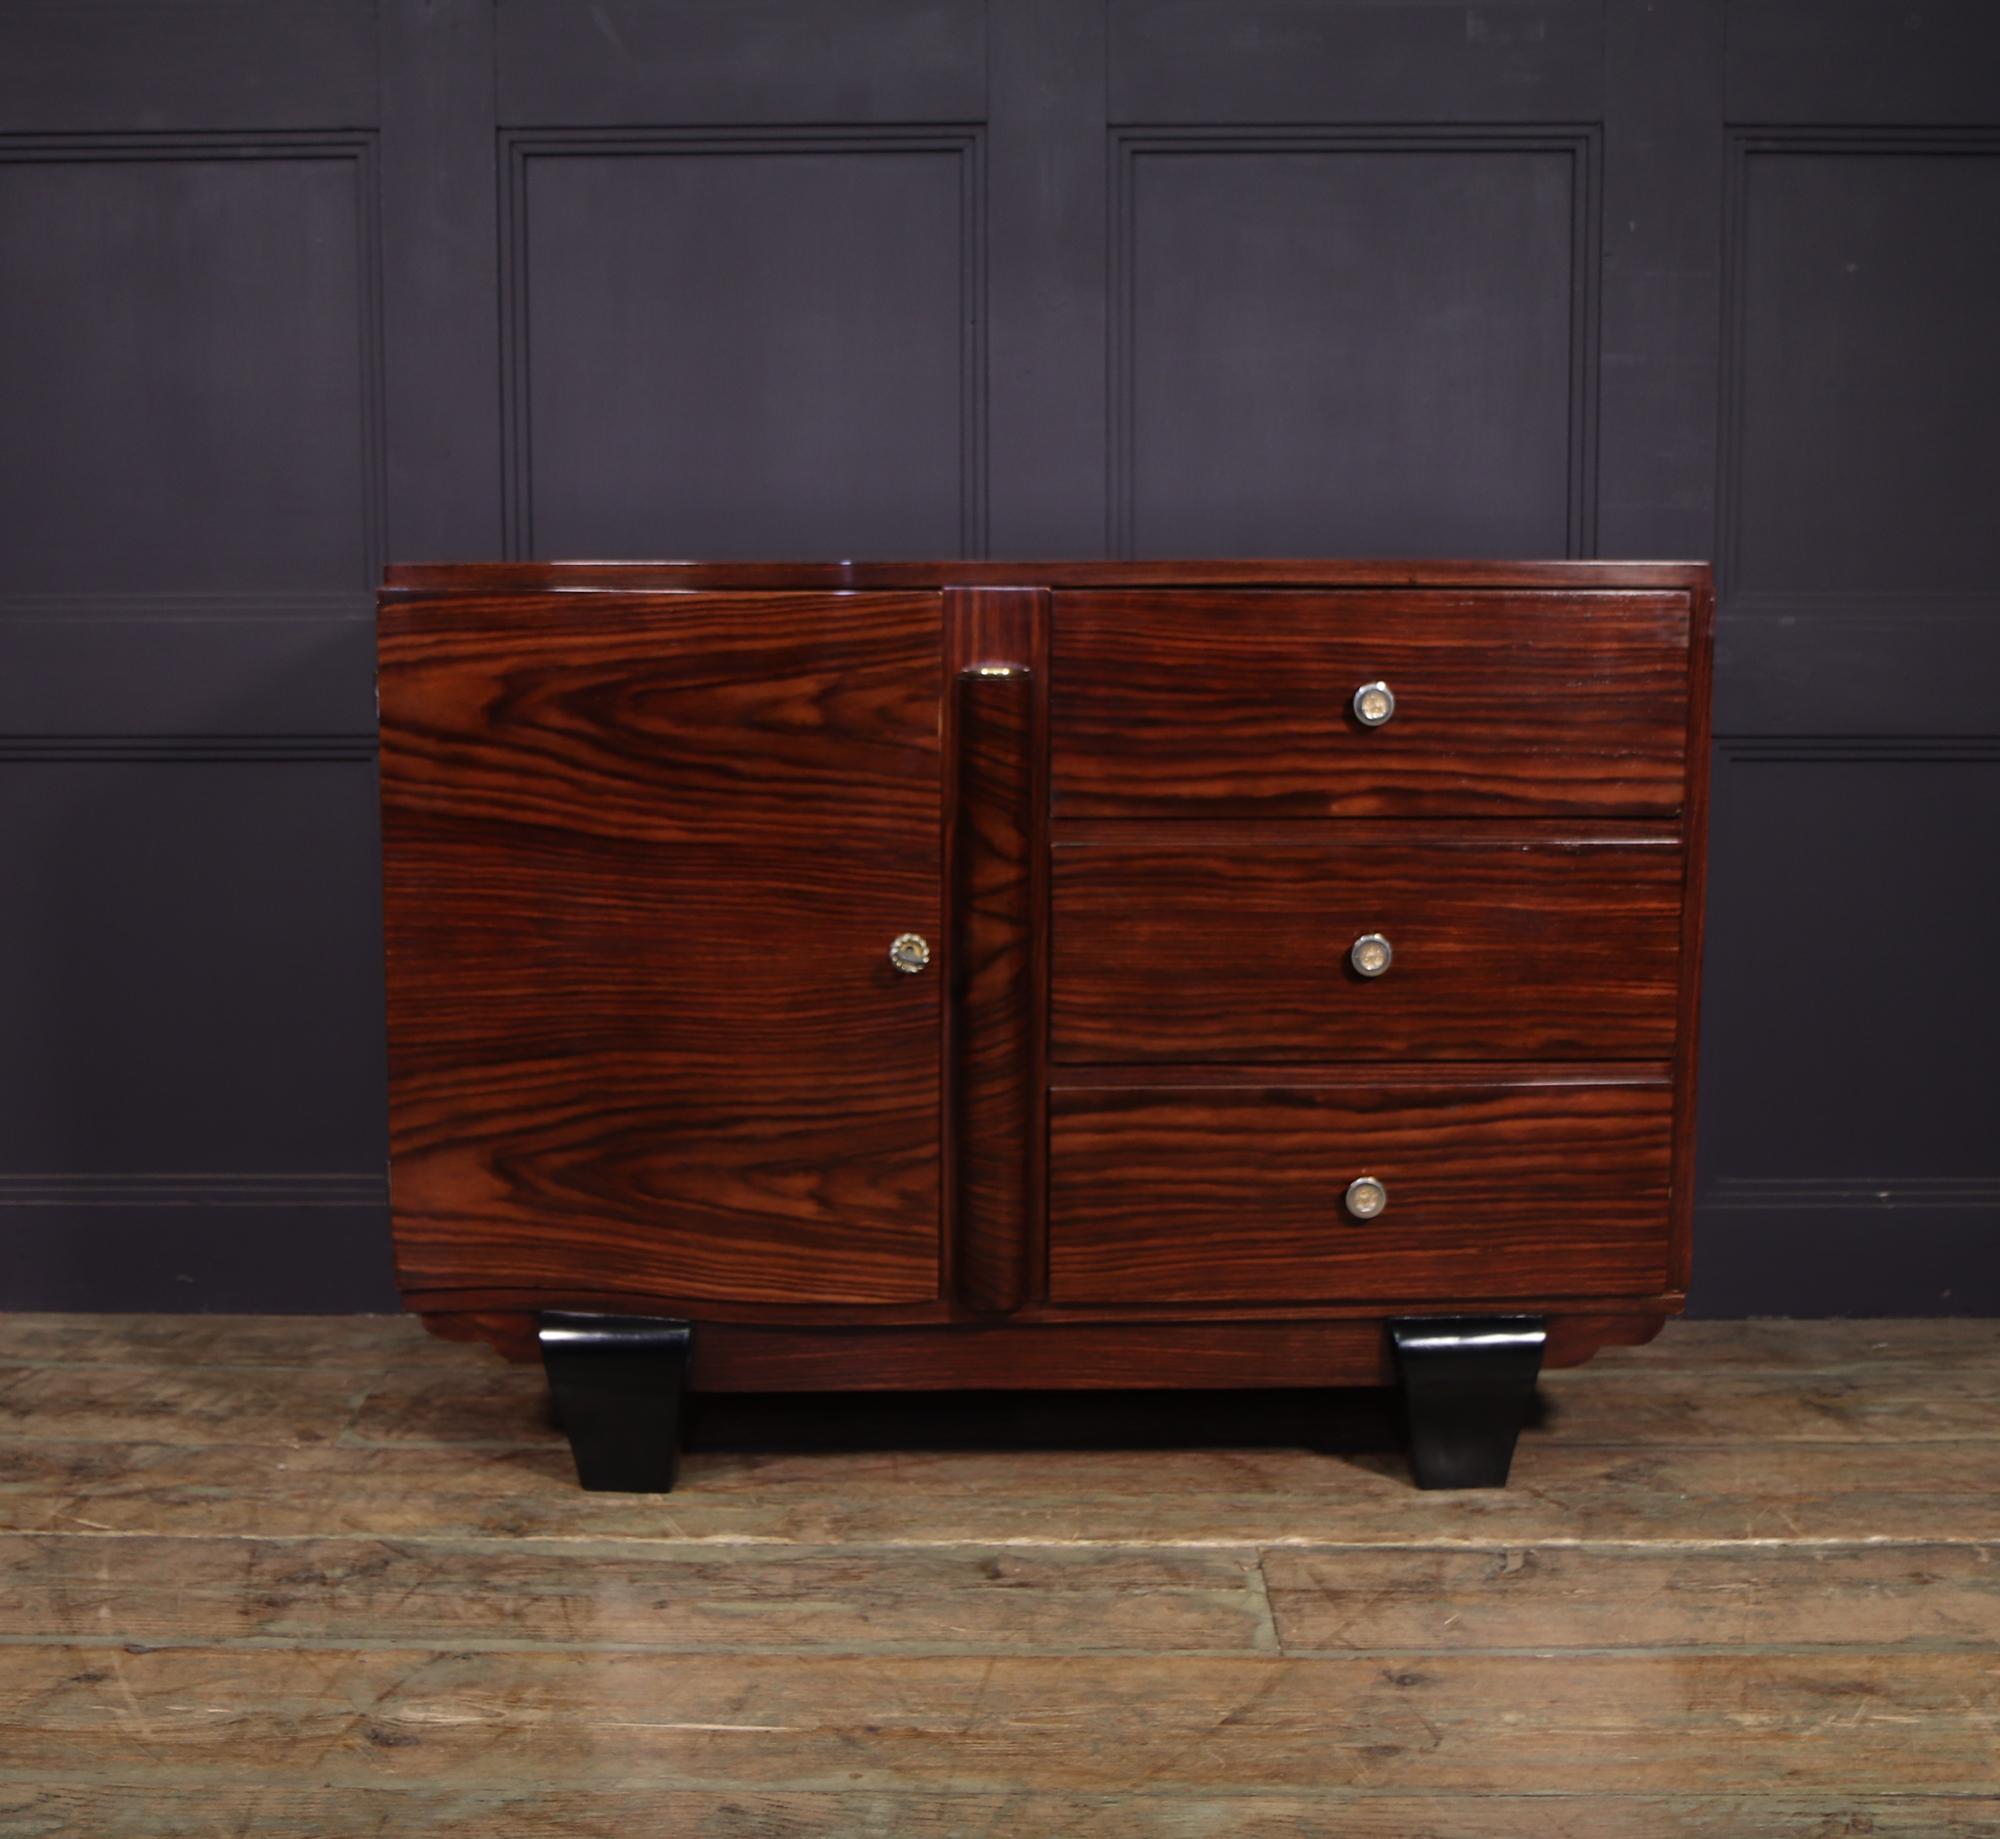 A small sideboard with single lockable door and three drawers in macassar ebony the sideboard is in excellent condition throughout and has bee restored where necessary and fully polished by hand

Age: 1930

Style: Art Deco

Material: Macassar